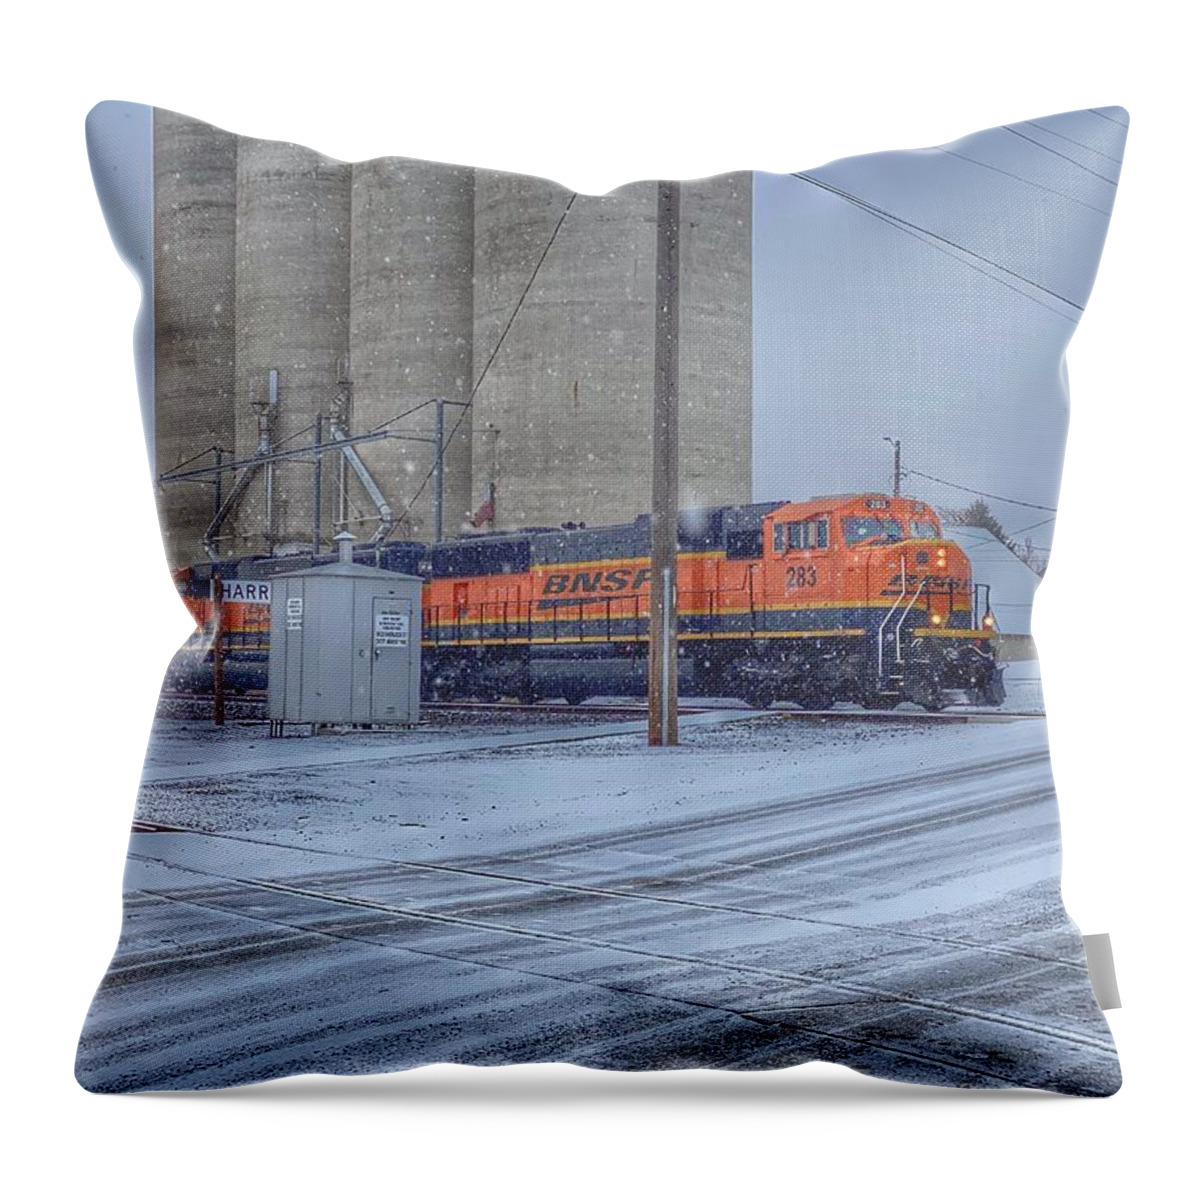 Snow Throw Pillow featuring the photograph Snowy Freight Train by Jerry Abbott